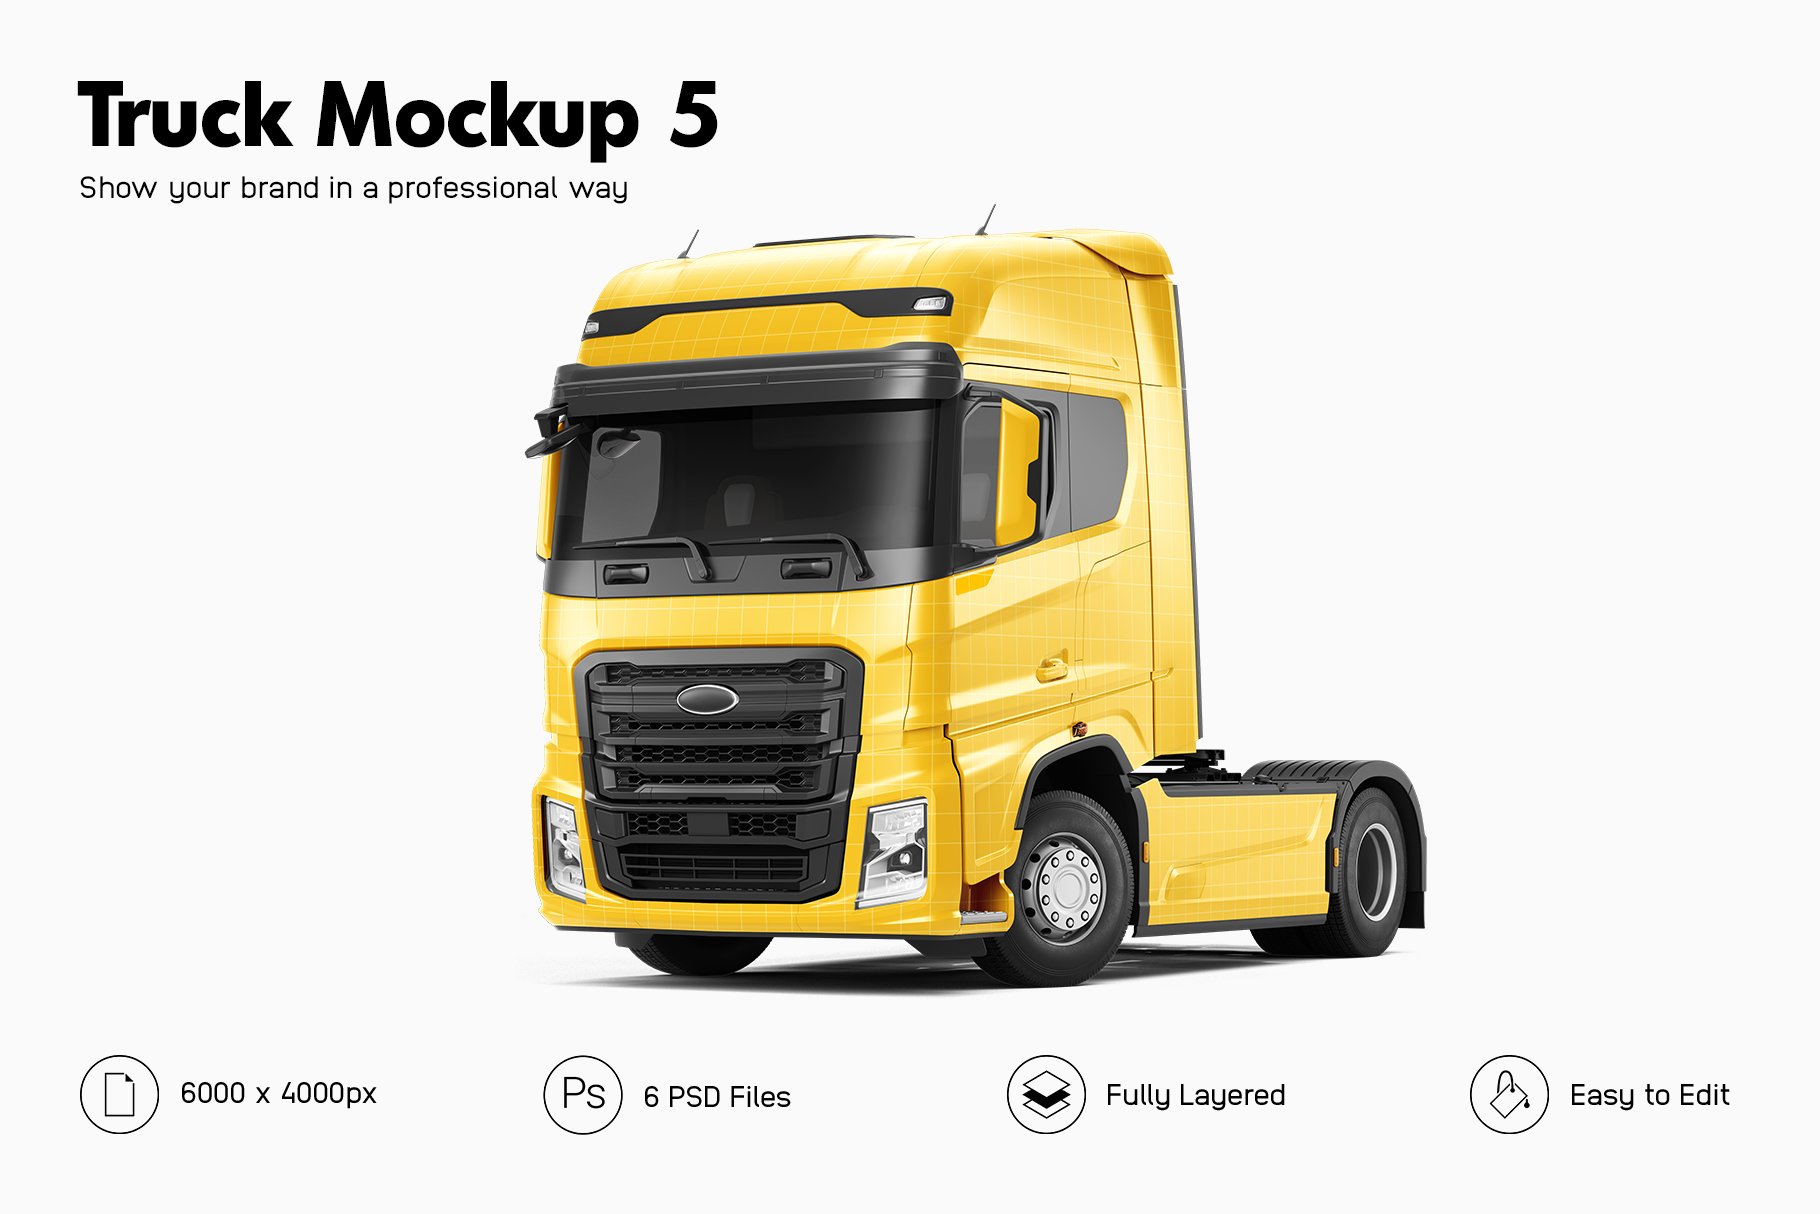 Truck Mockup 5 cover image.